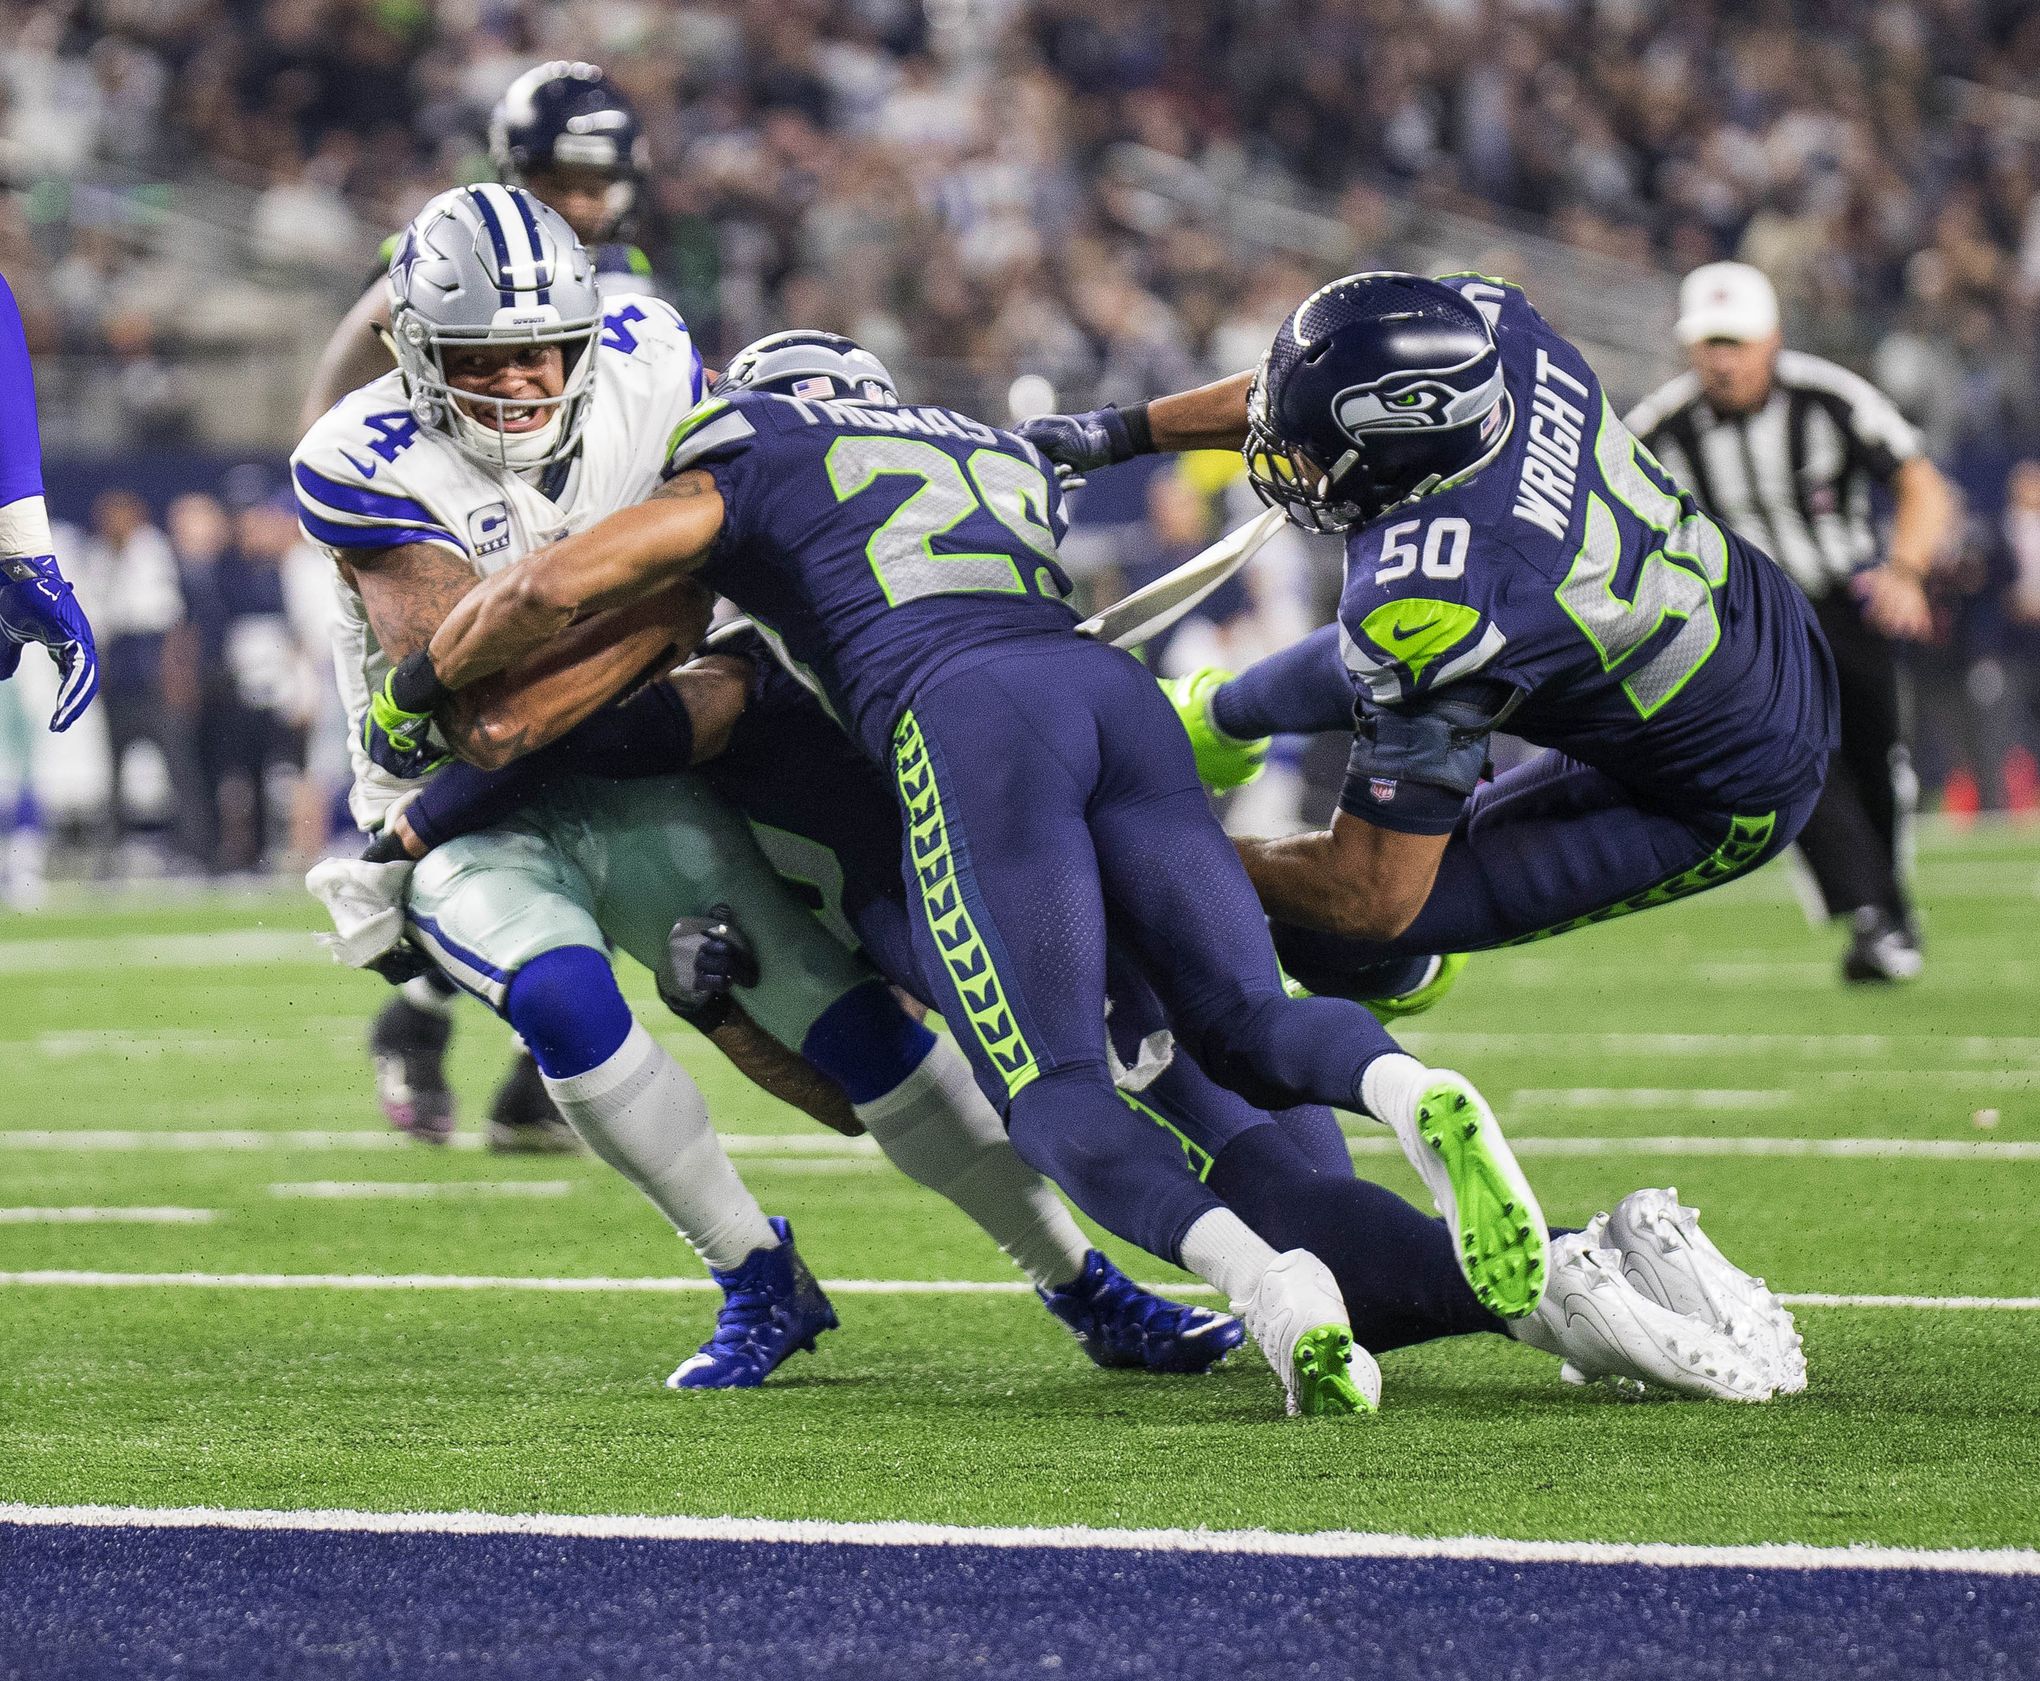 What Seahawks safety Earl Thomas said about Cowboys coaches asking